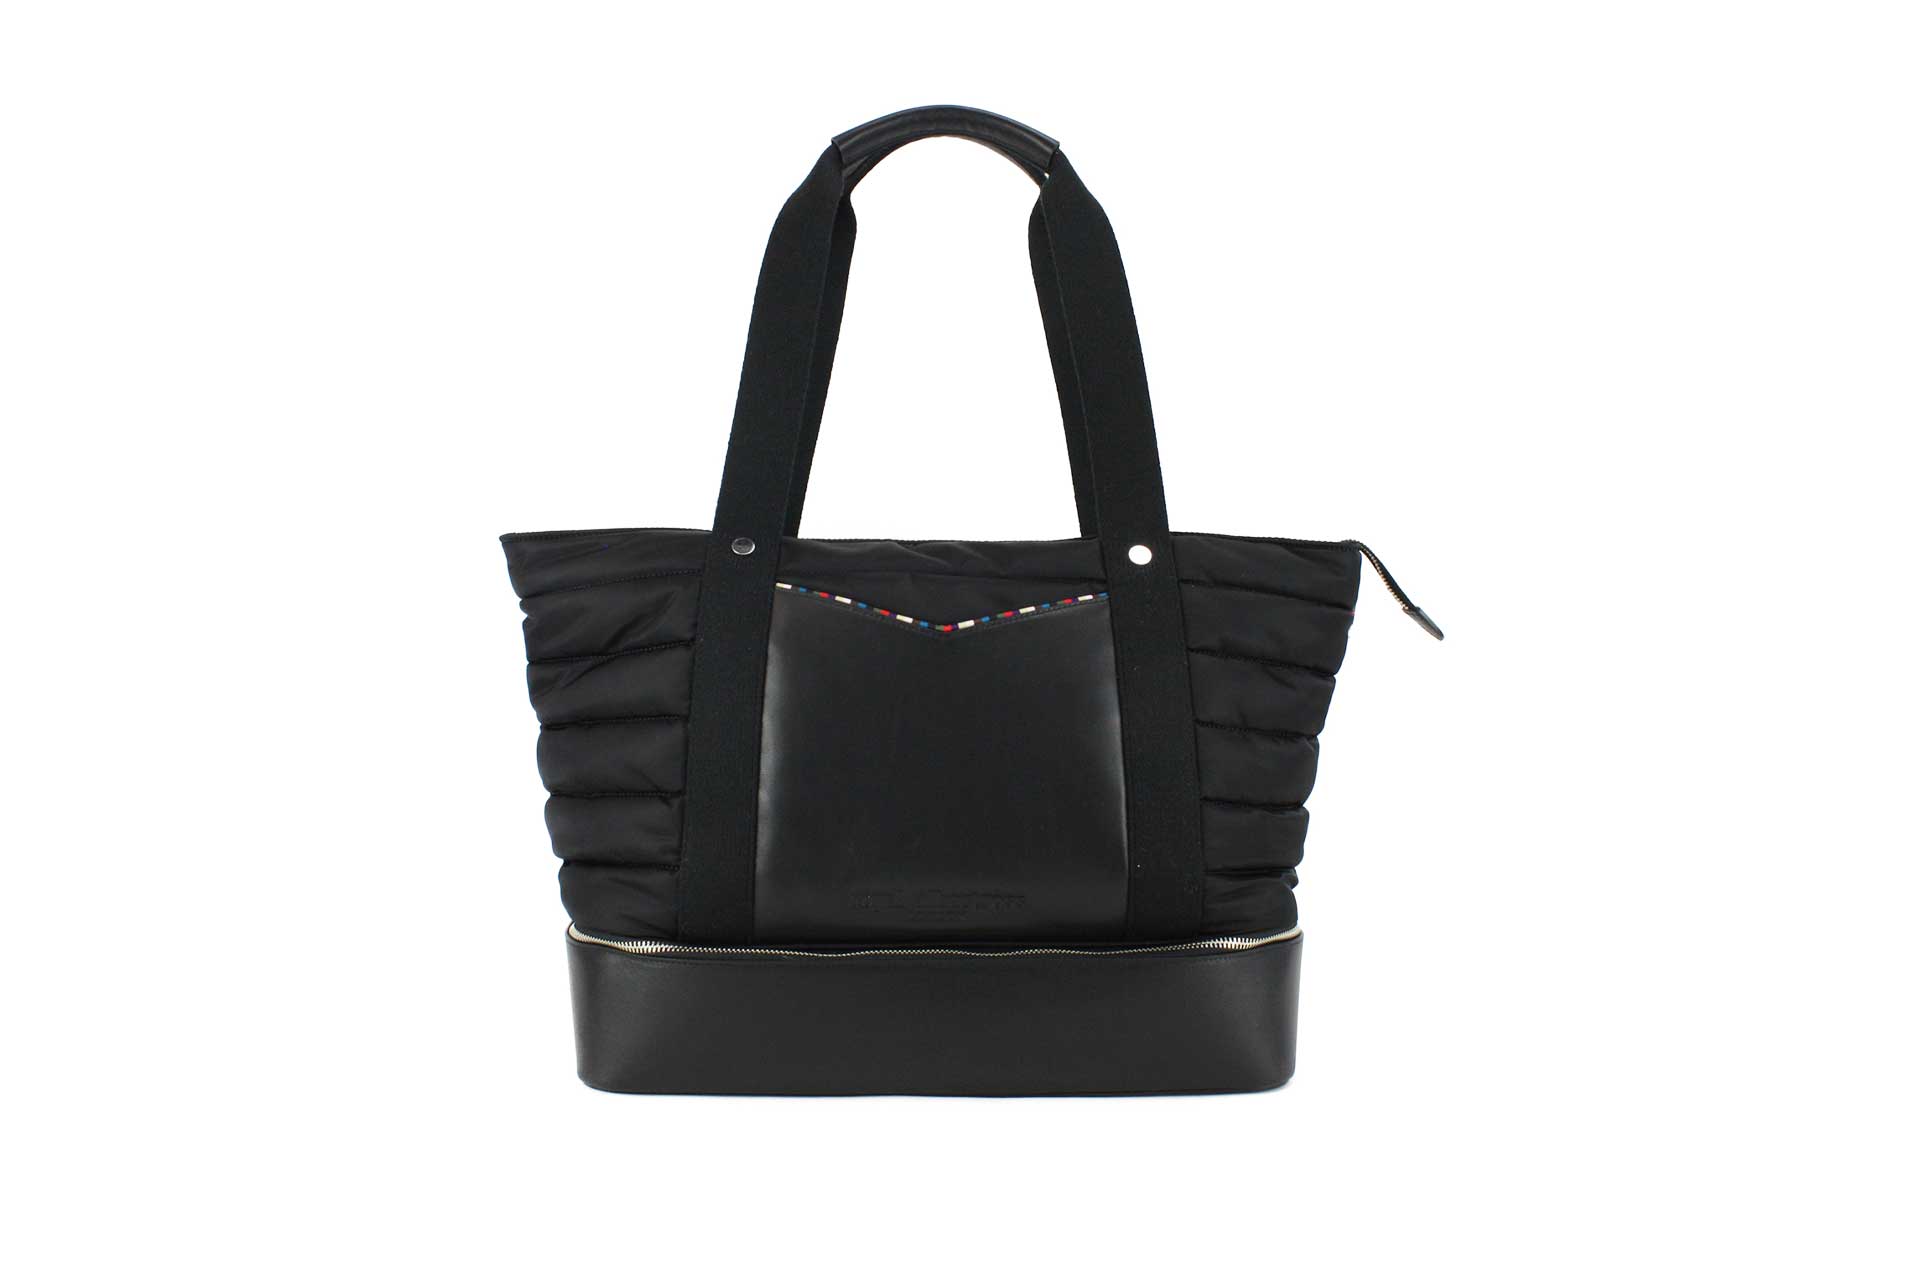 Marlow Sports Tote Bag | Luxury Nylon and Leather | Royal Albartross